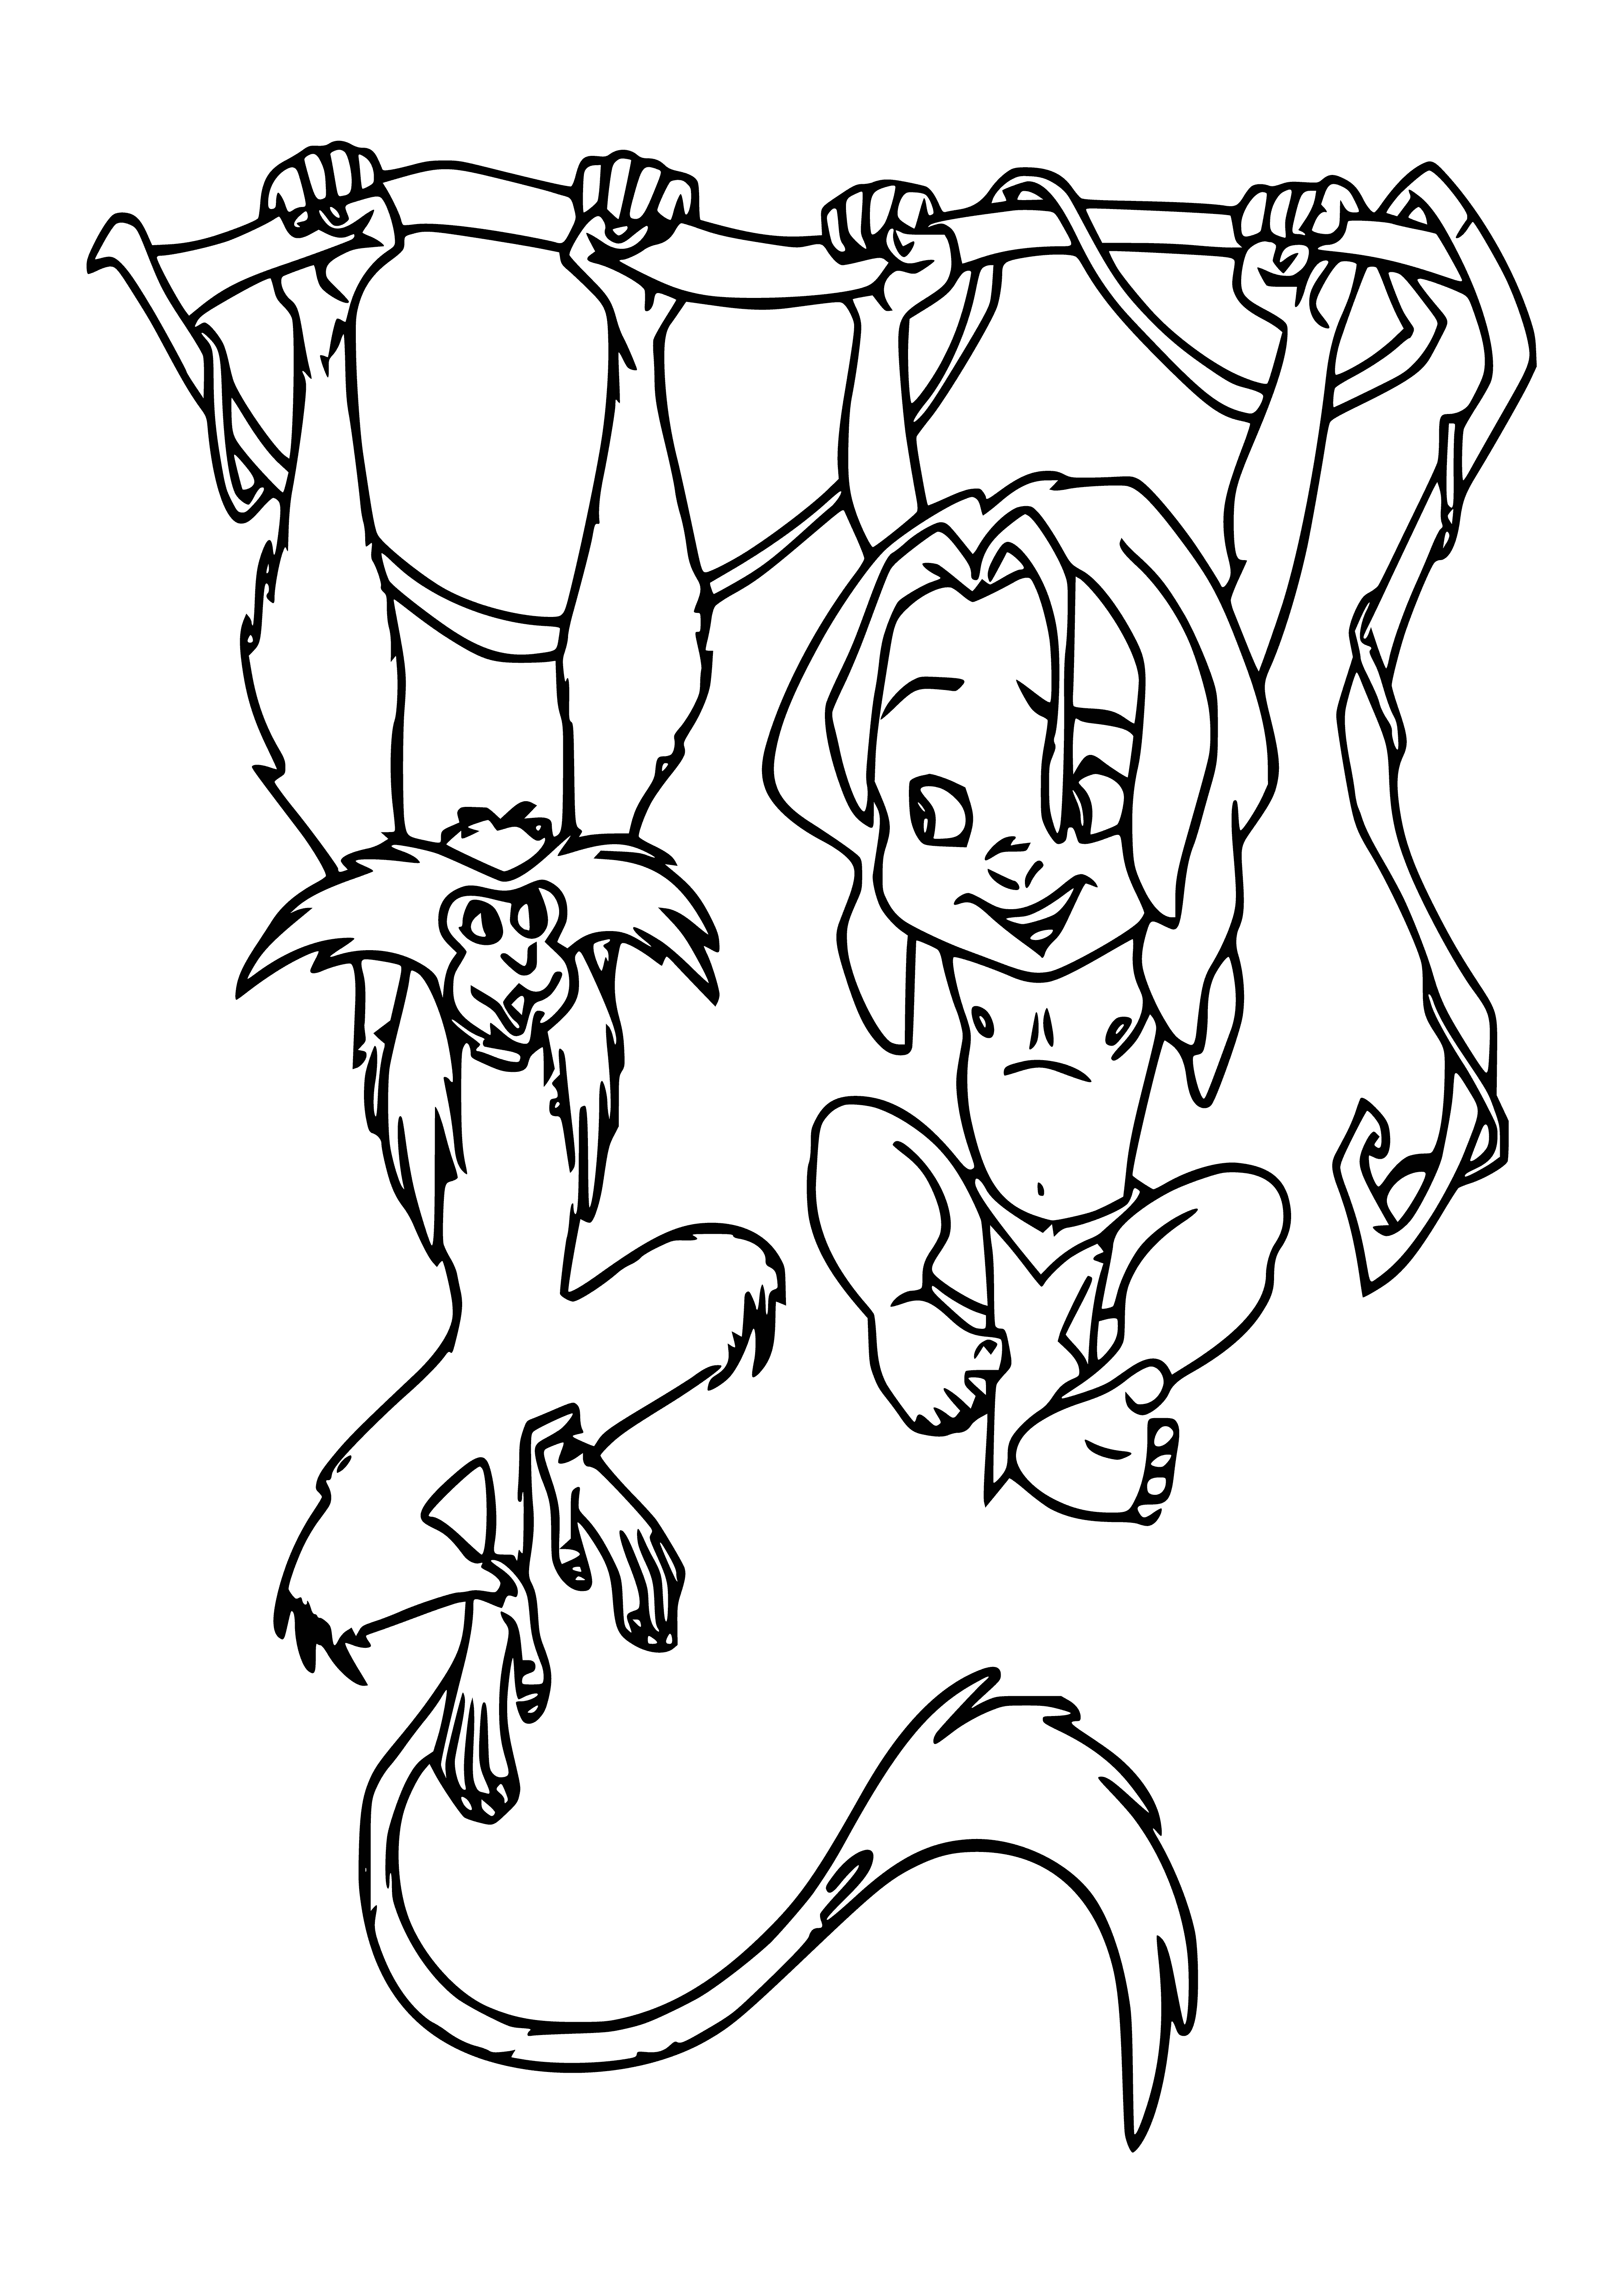 coloring page: A man and monkey hang from a vine high above the ground. The man is shirtless and powerfully built, with loincloth, long dark hair, and outstretched arm to the monkey, whose expression is hard to read.